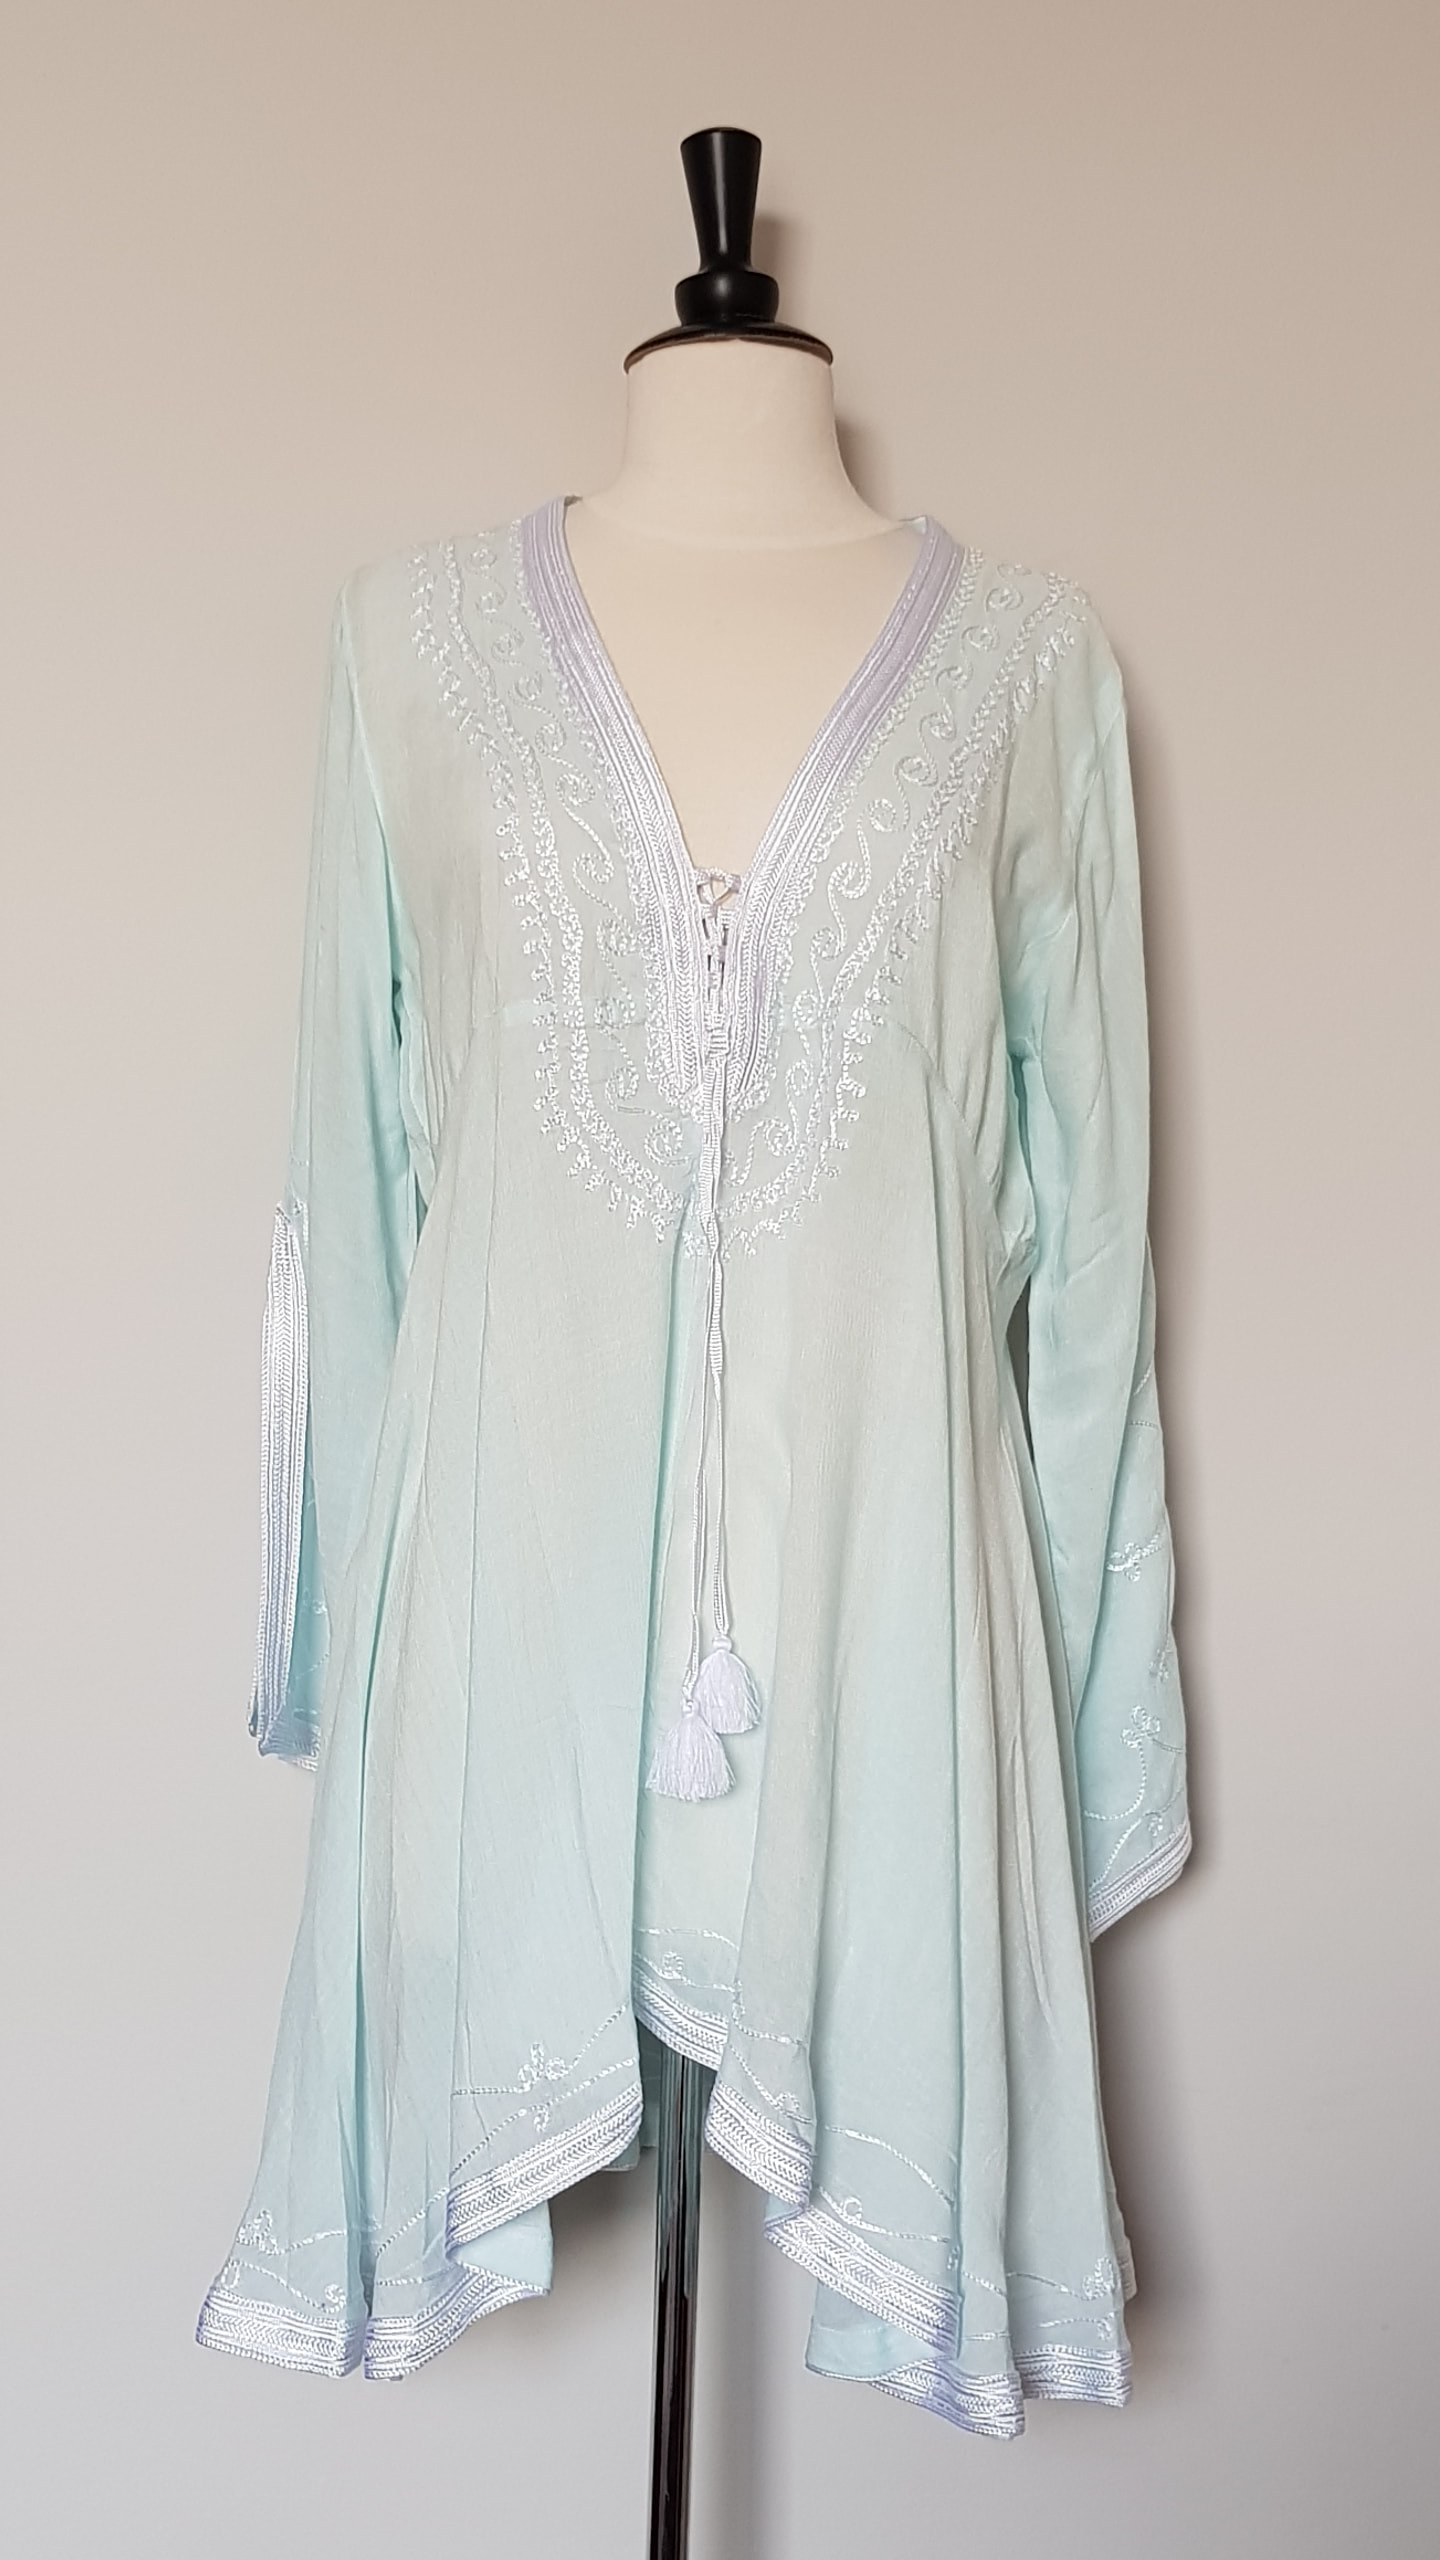 100% Cotton kaftan in pale turquoise with white embroidery